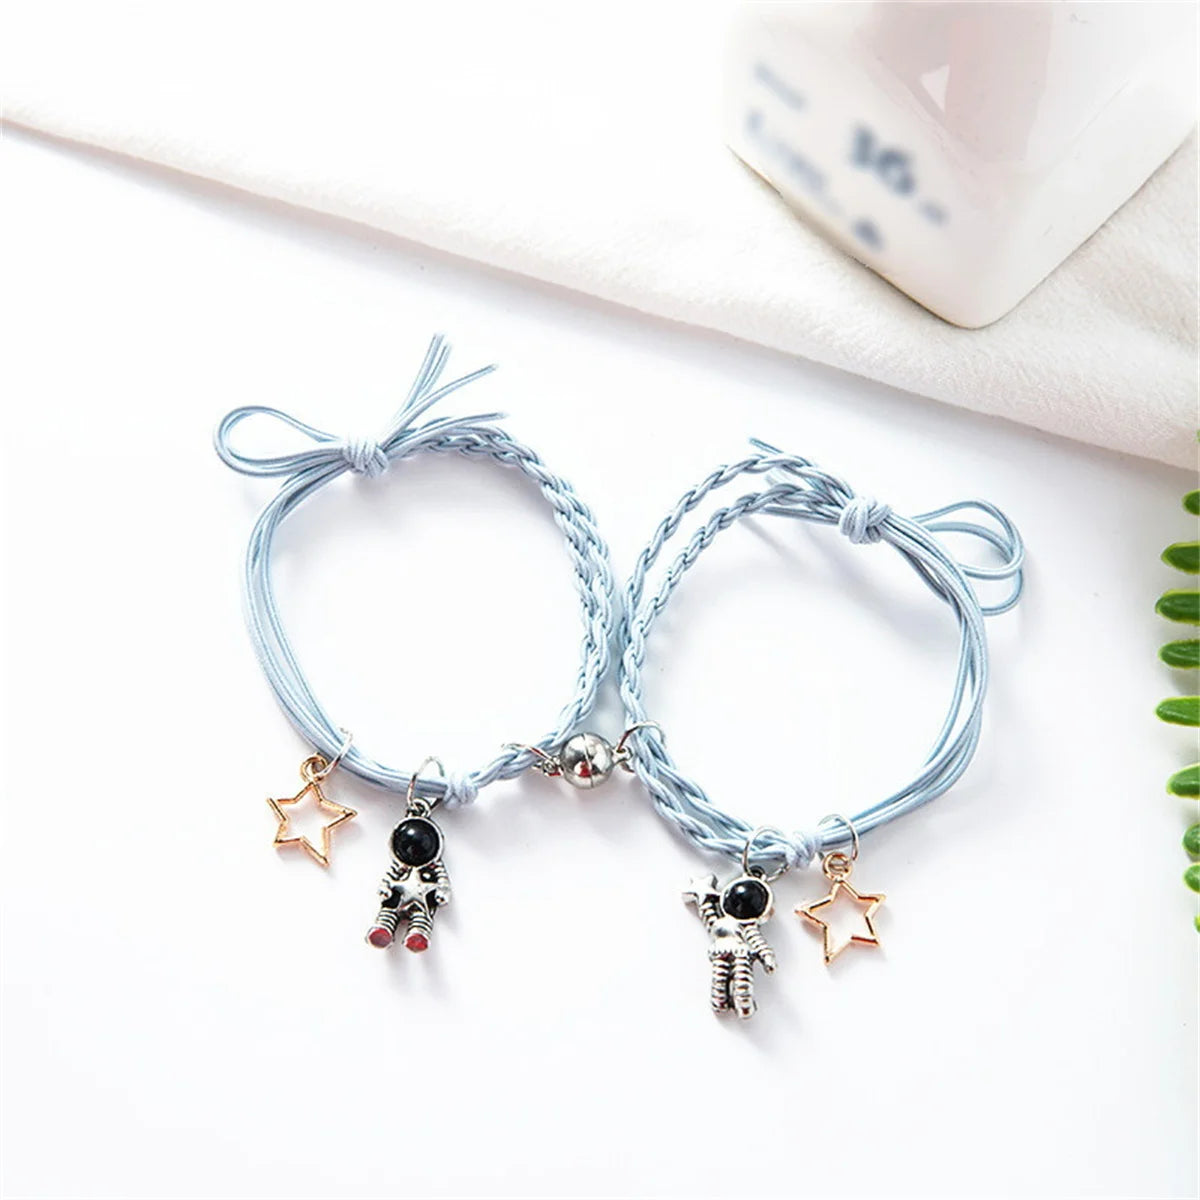 2Pcs/Set Astronaut Hollow Star Couple Bracelet For Lovers Magnetic Attract Spaceman Braided Rope Bracelets Friendship Jewelry